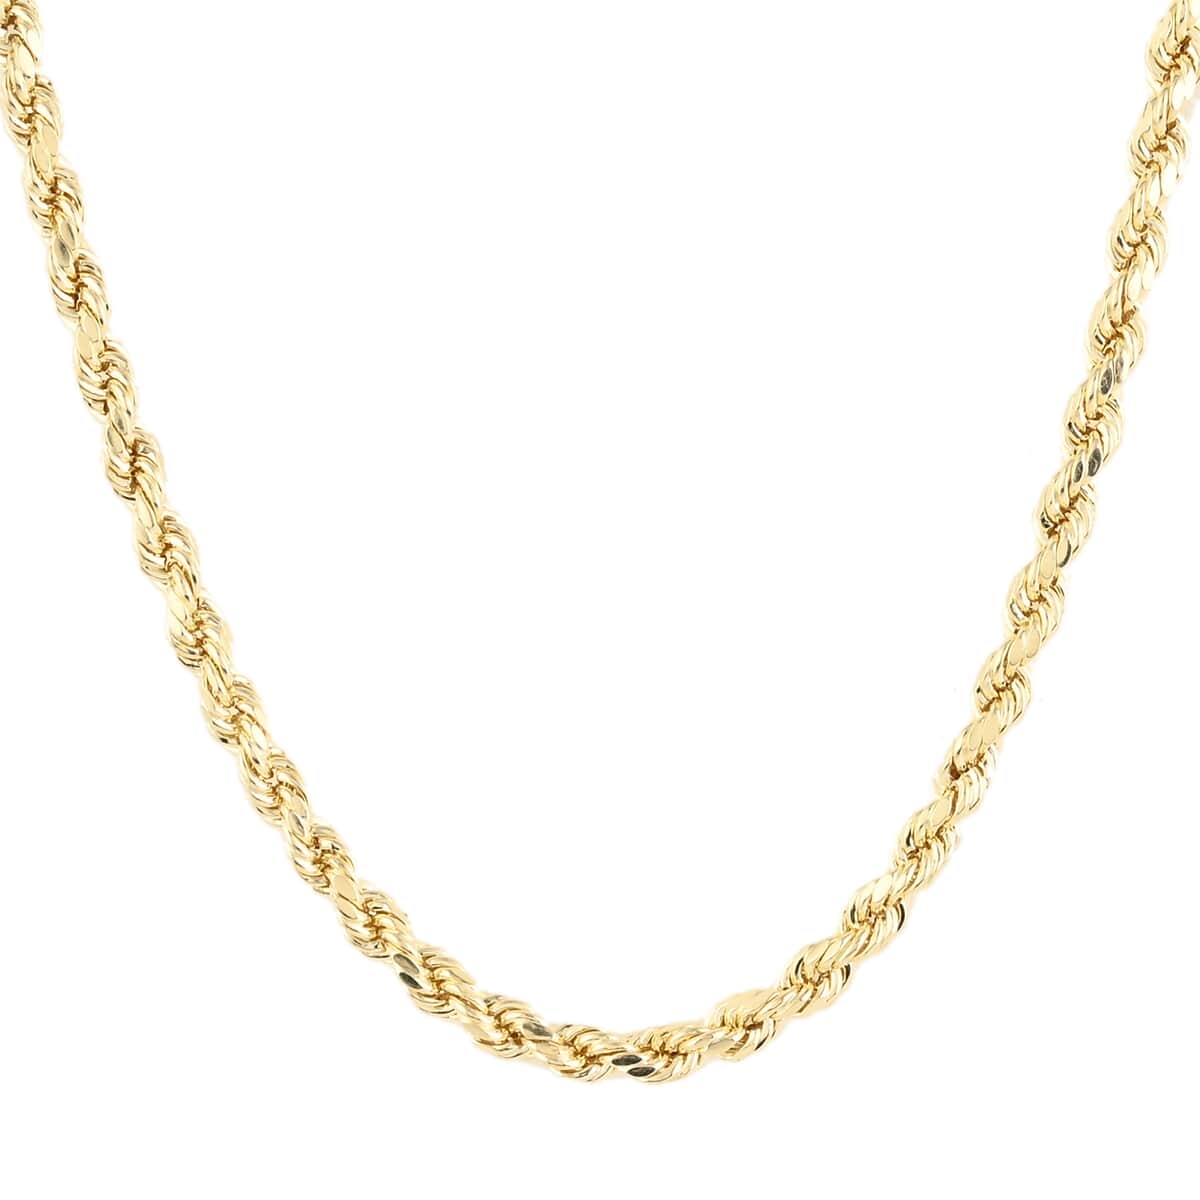 CALIFORNIA CLOSEOUT DEAL 10K Yellow Gold 4mm Diamond Cut Rope Necklace 18 Inches 7.25 Grams (Shipped in 3-4 Business Days) image number 0